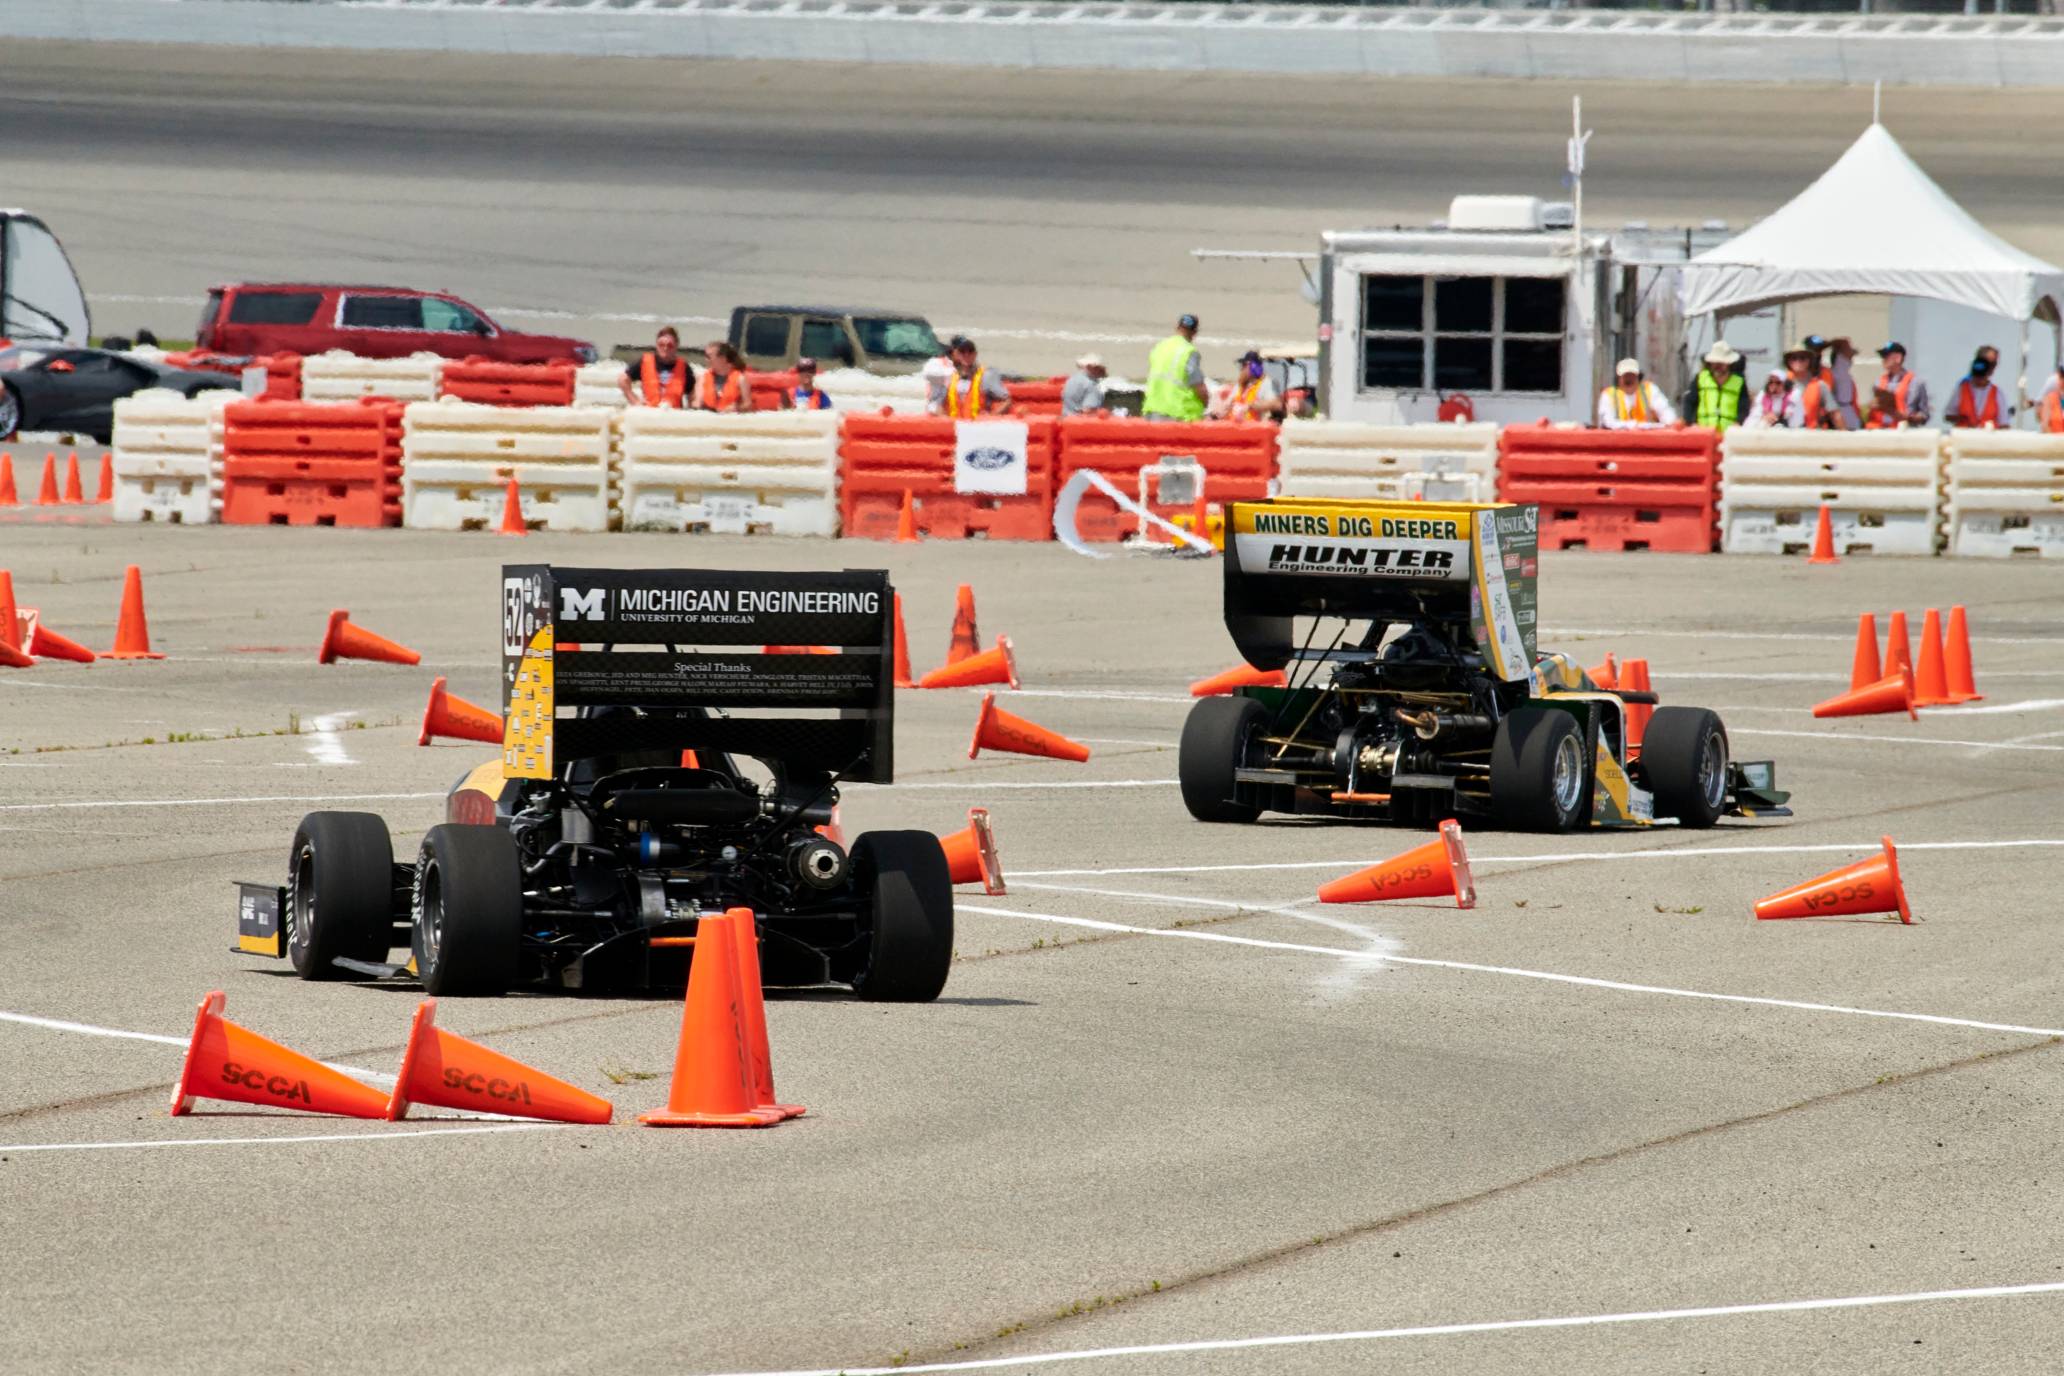 Student project vehicles competing in an international competition.